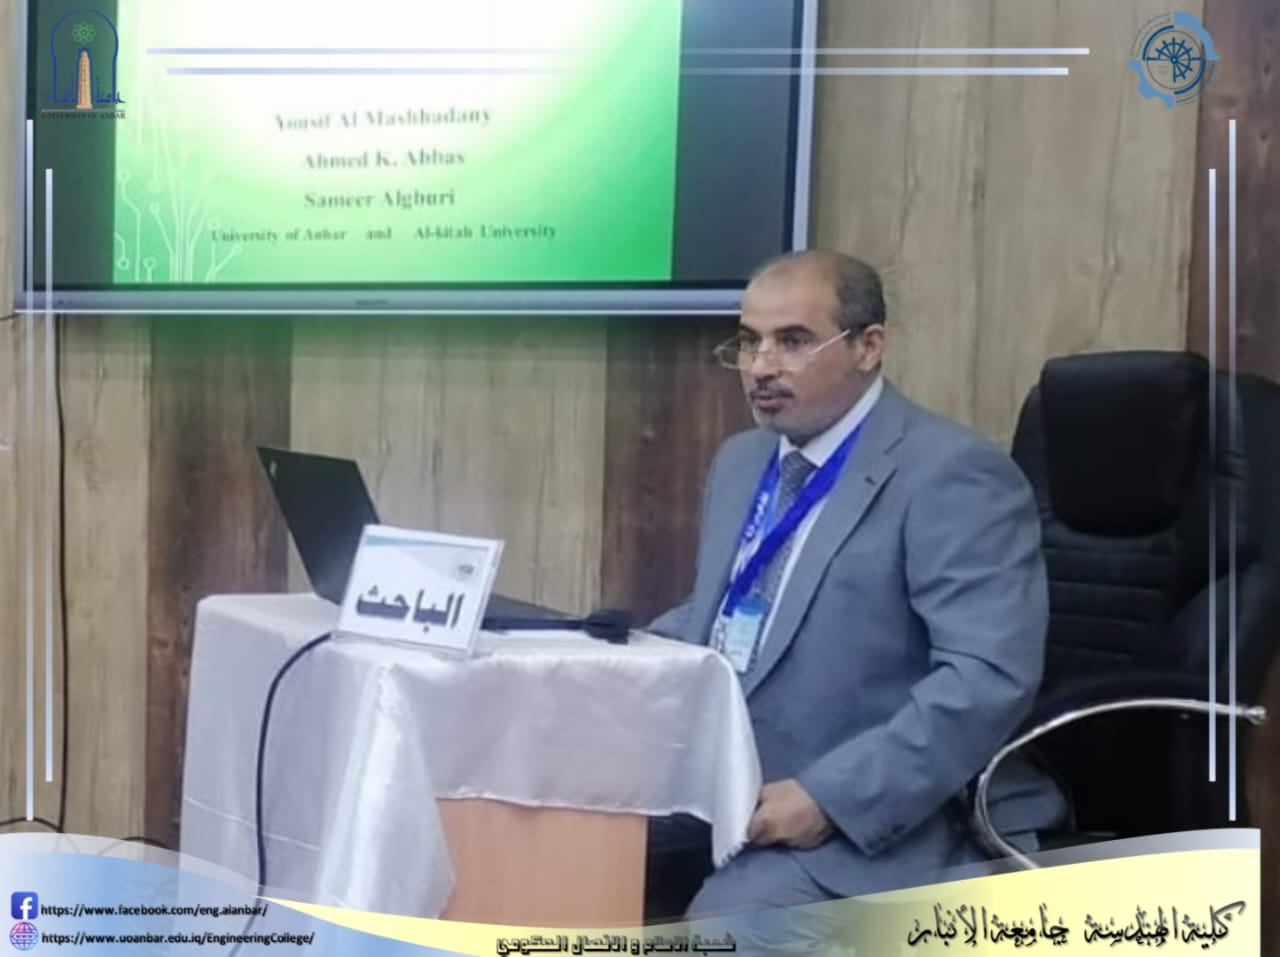  Participation in the Second International Conference on Renewable Energy at Tikrit University.